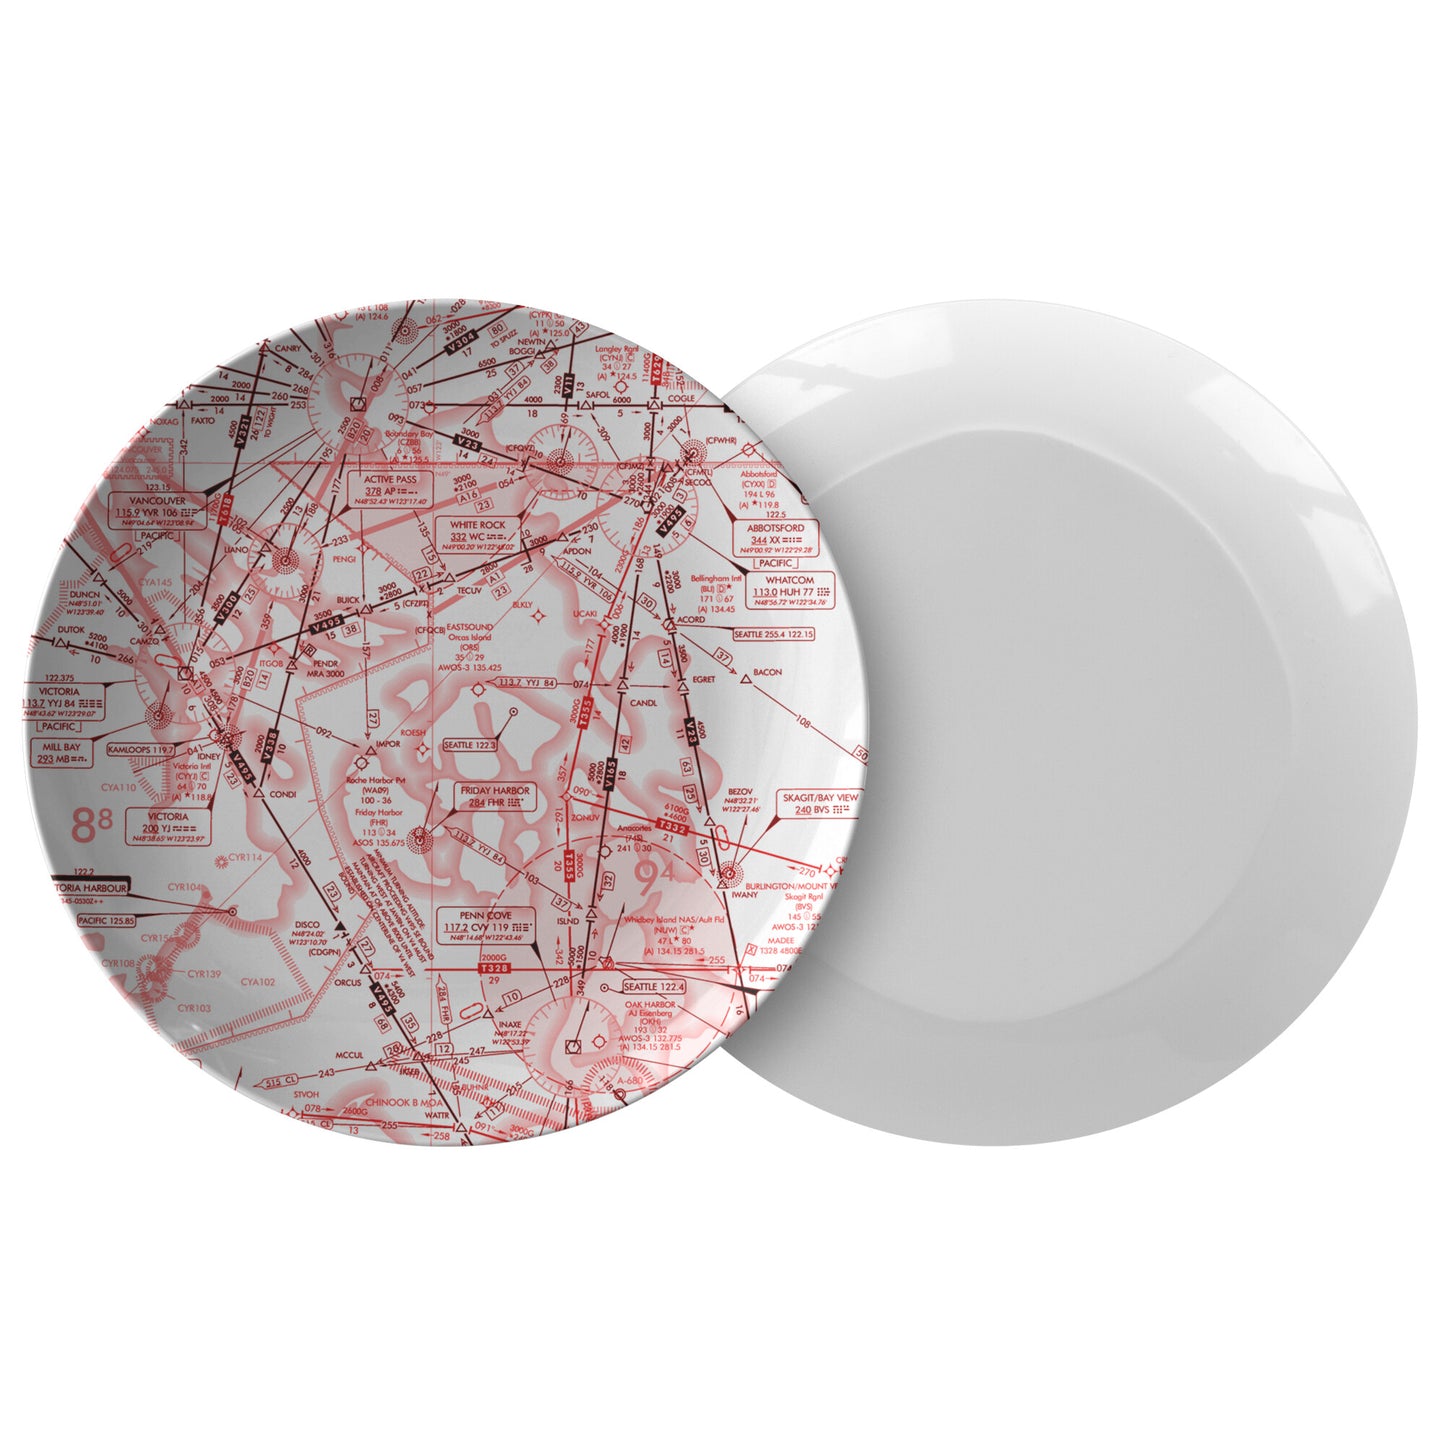 Enroute Low Altitude Chart plate (red&white)